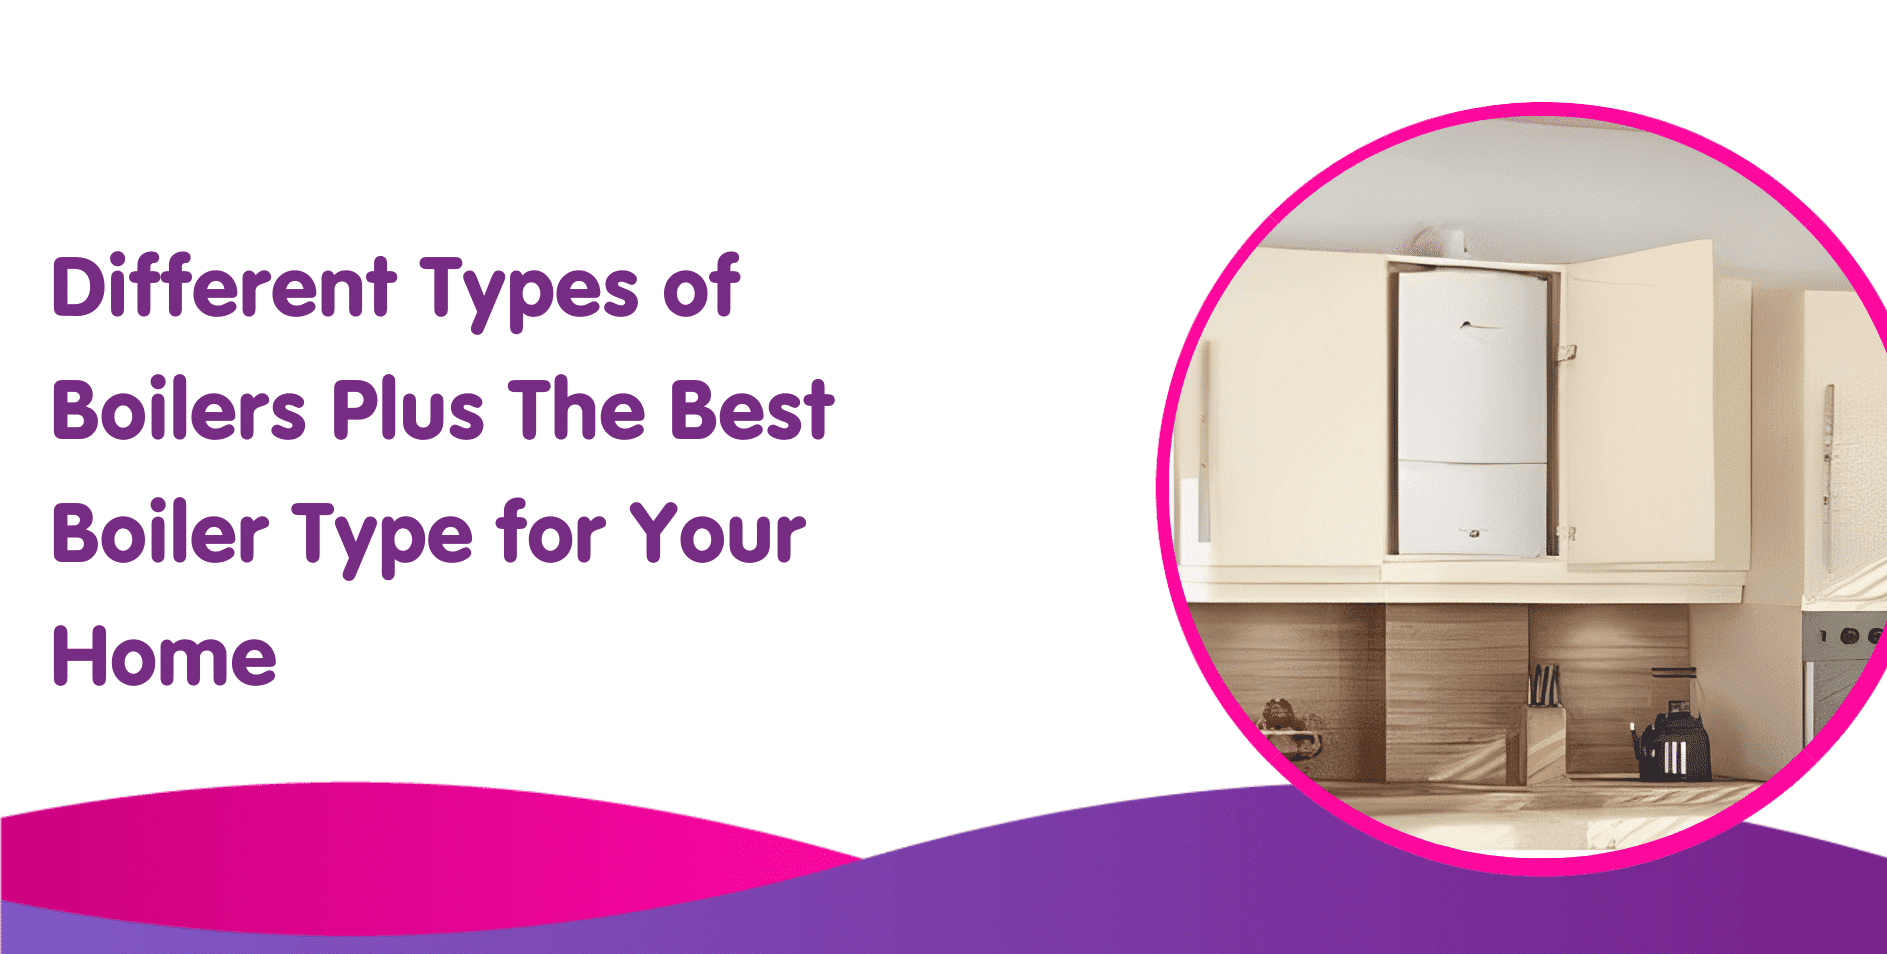 Different Types of Boilers Plus The Best Boiler Type for Your Home